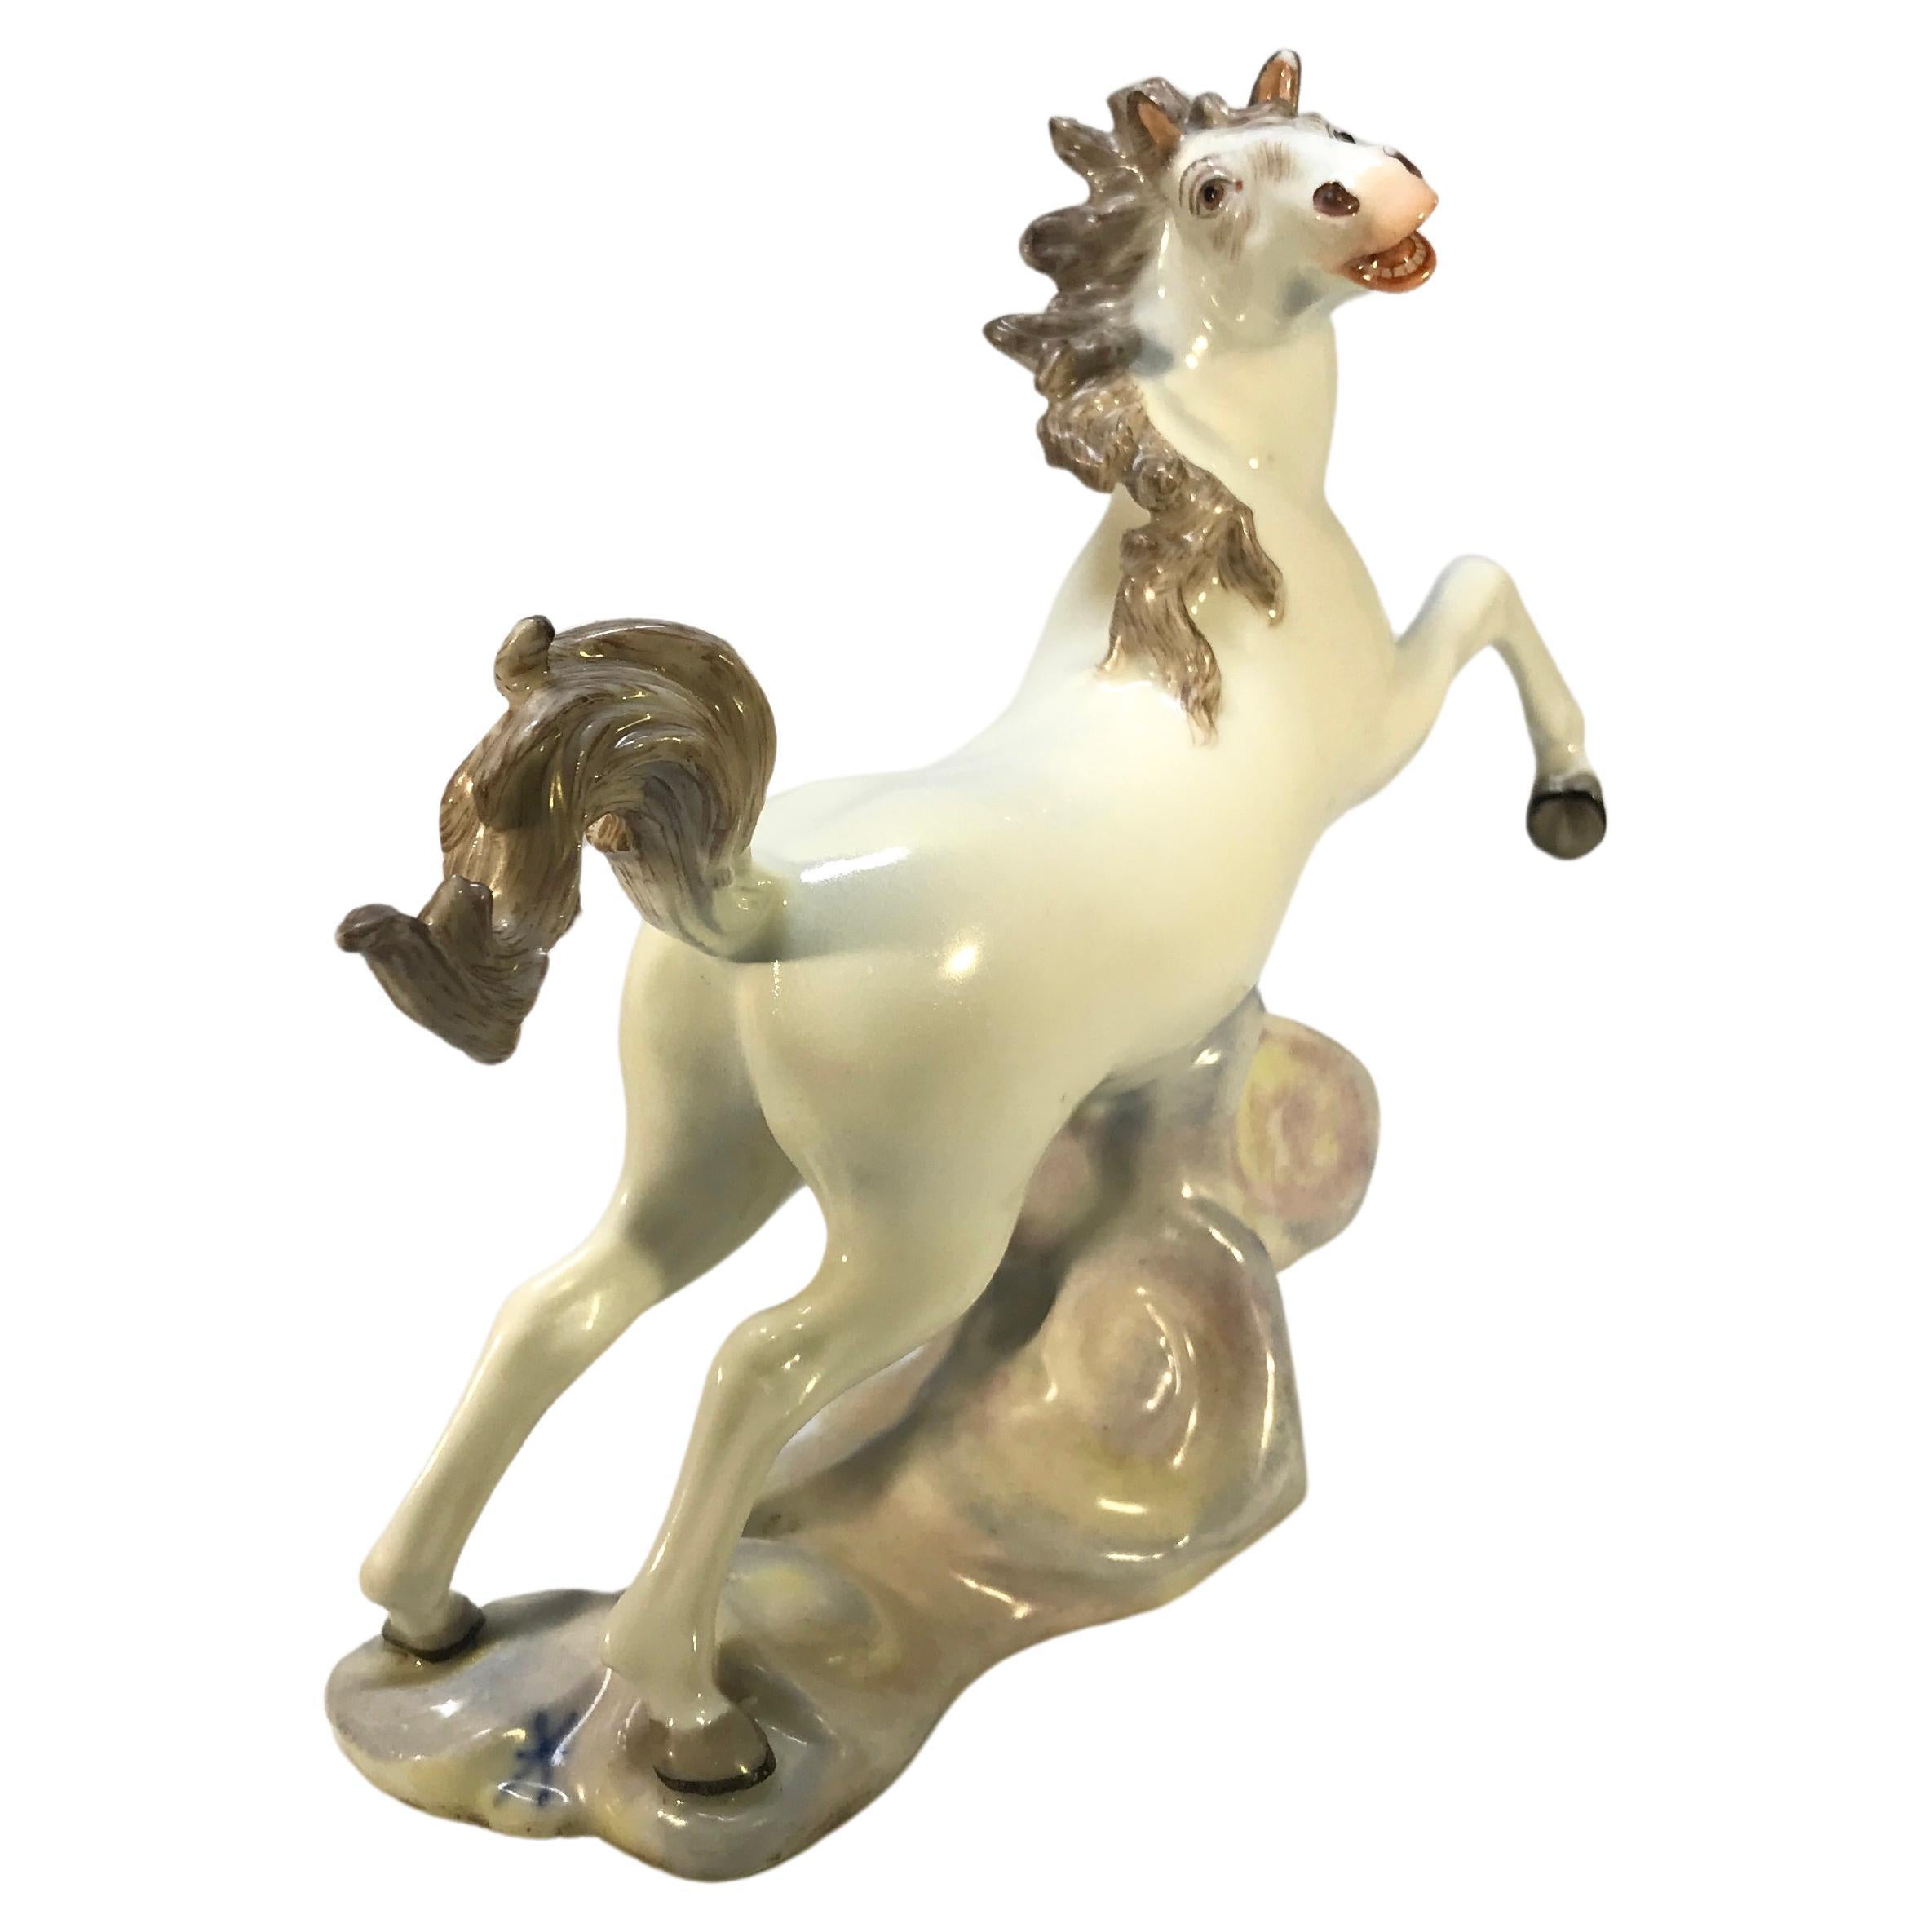 Lively Continental White Porcelain Hand Painted Prancing Horse Figure Samson